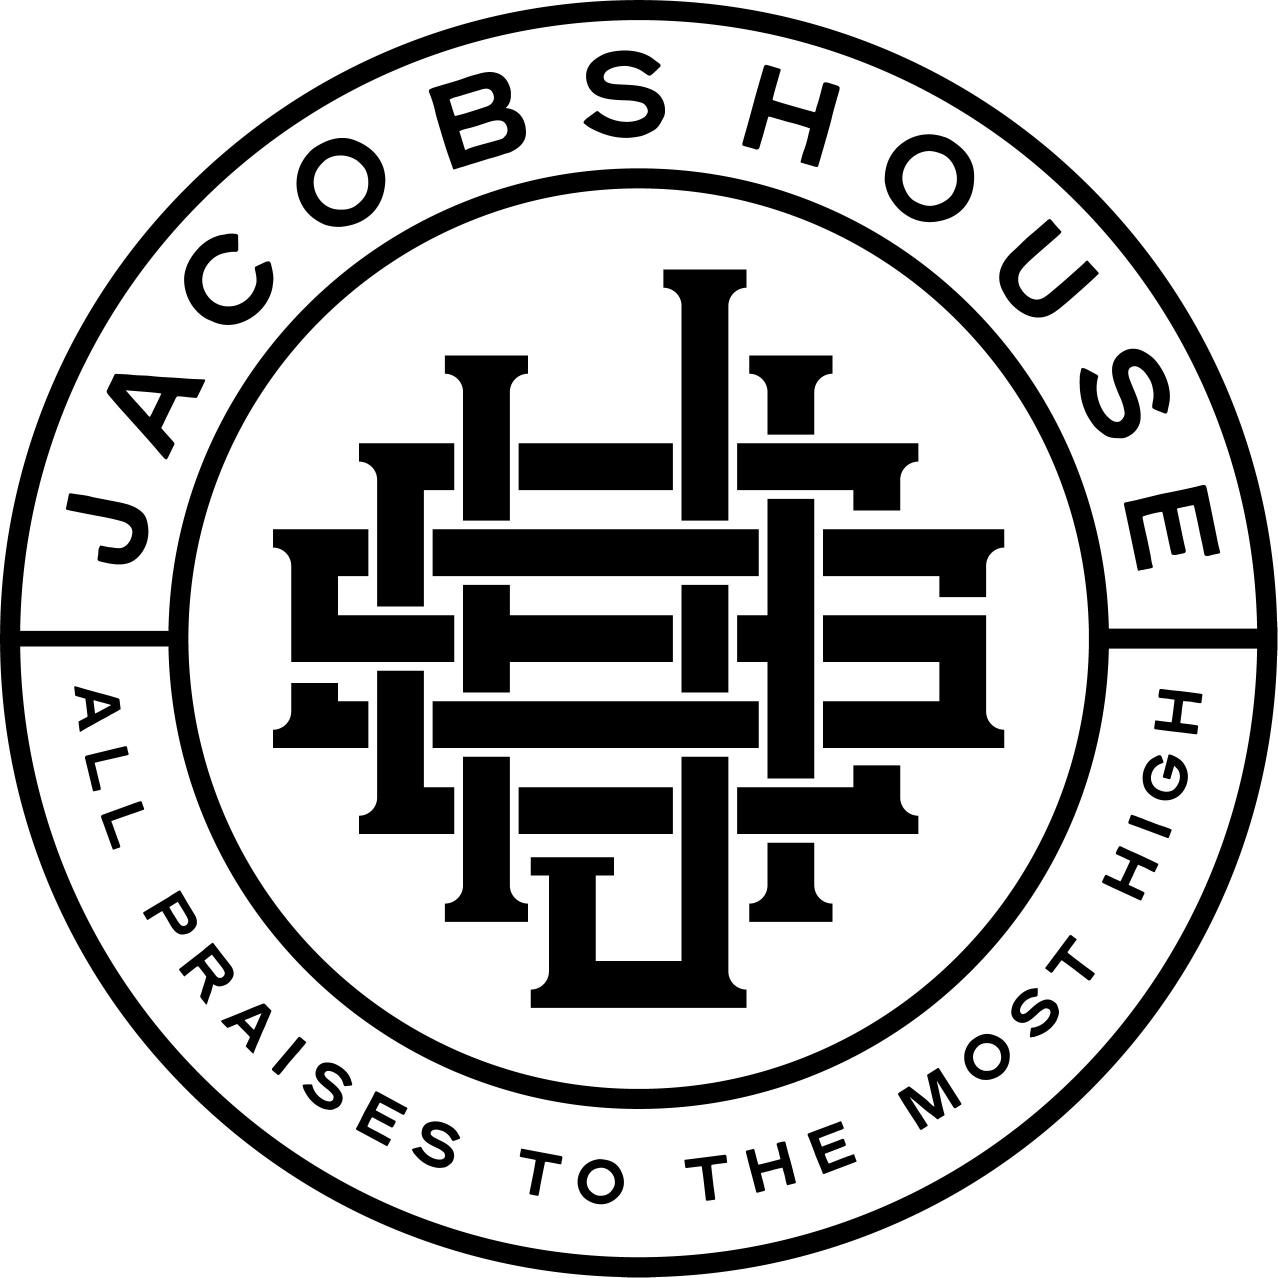 Jacob’s House's images